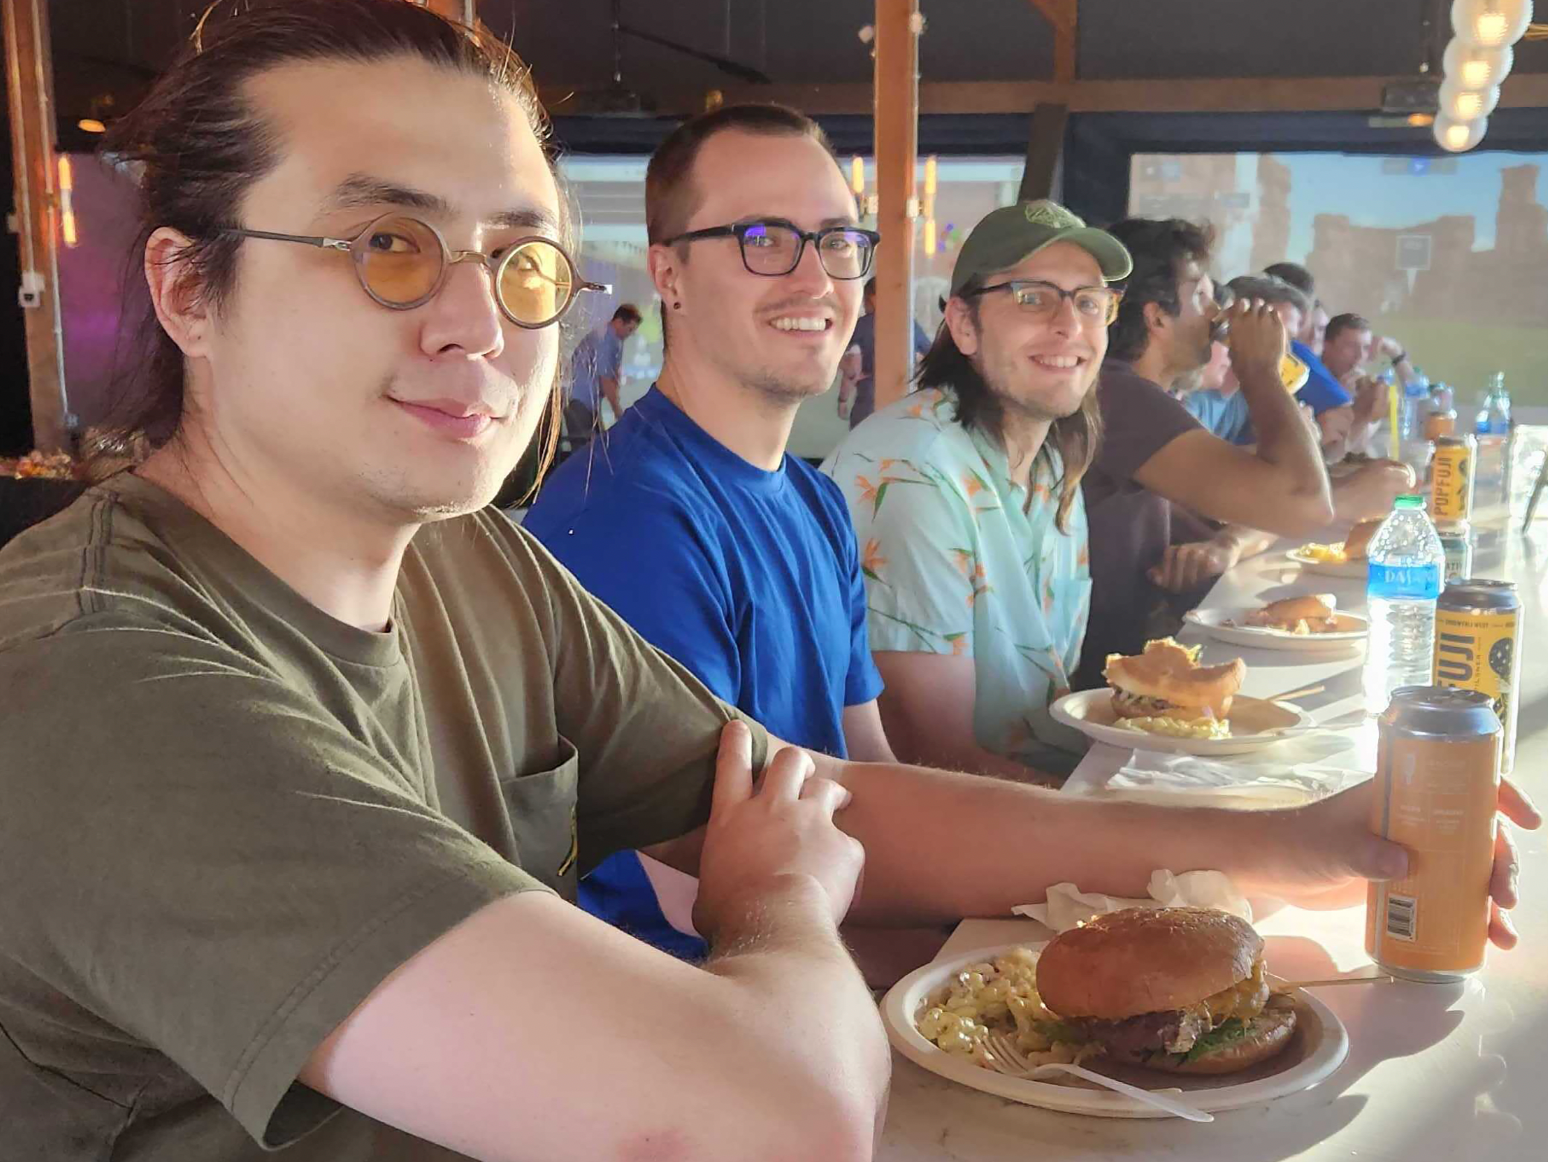 Team members eating at a restaurant together